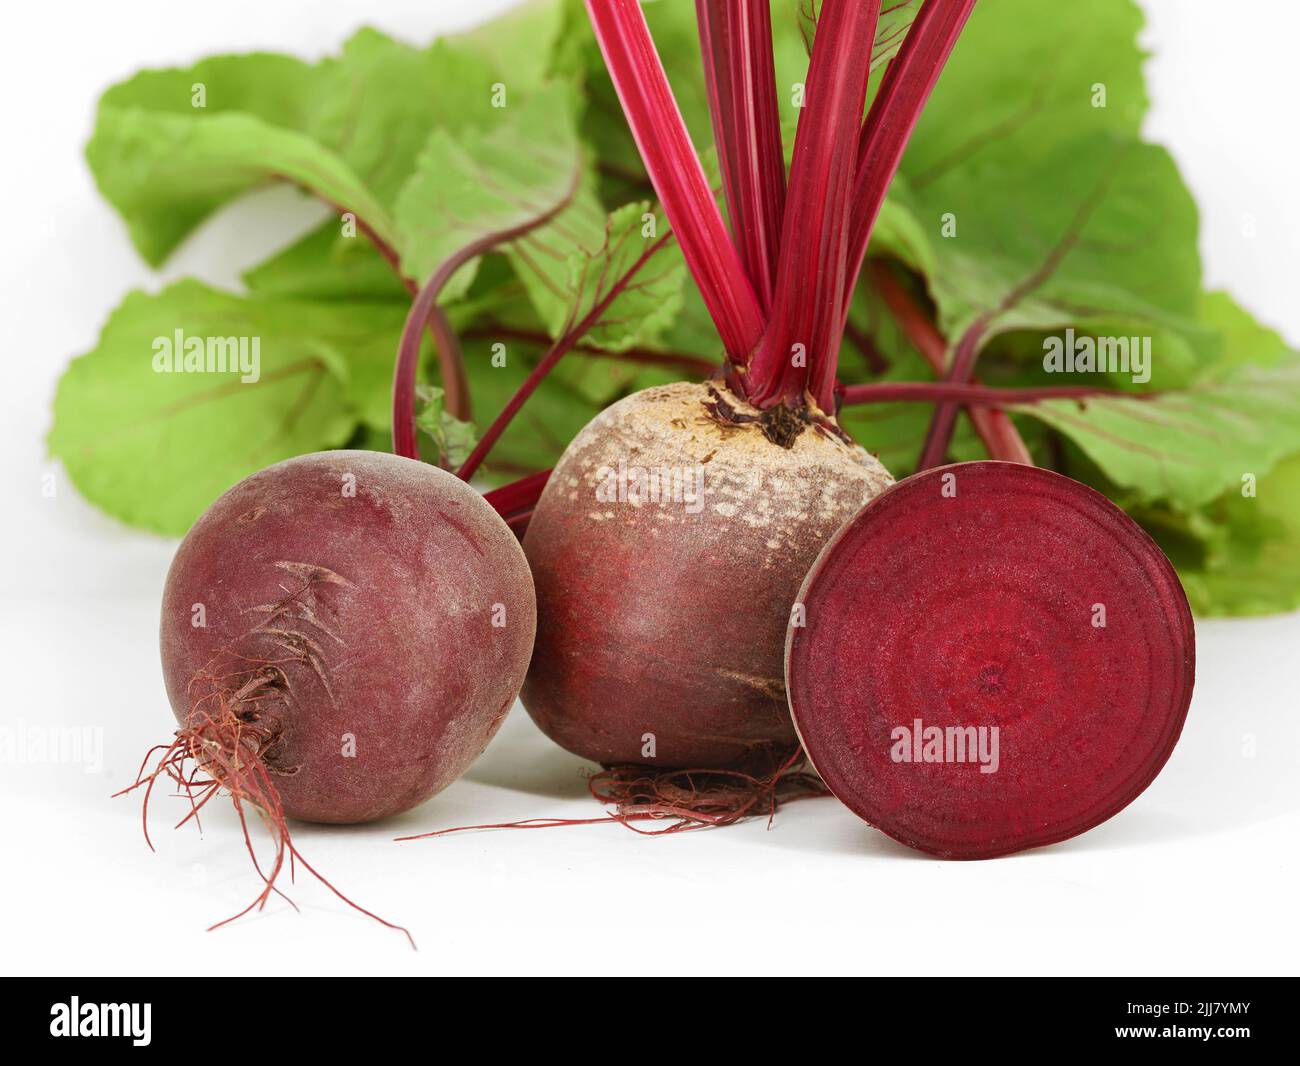 Fresh beetroots with leaves, Beta vulgaris, isolated on white background, healthy organic root vegetable with lots of vitamins and minerals Stock Photo